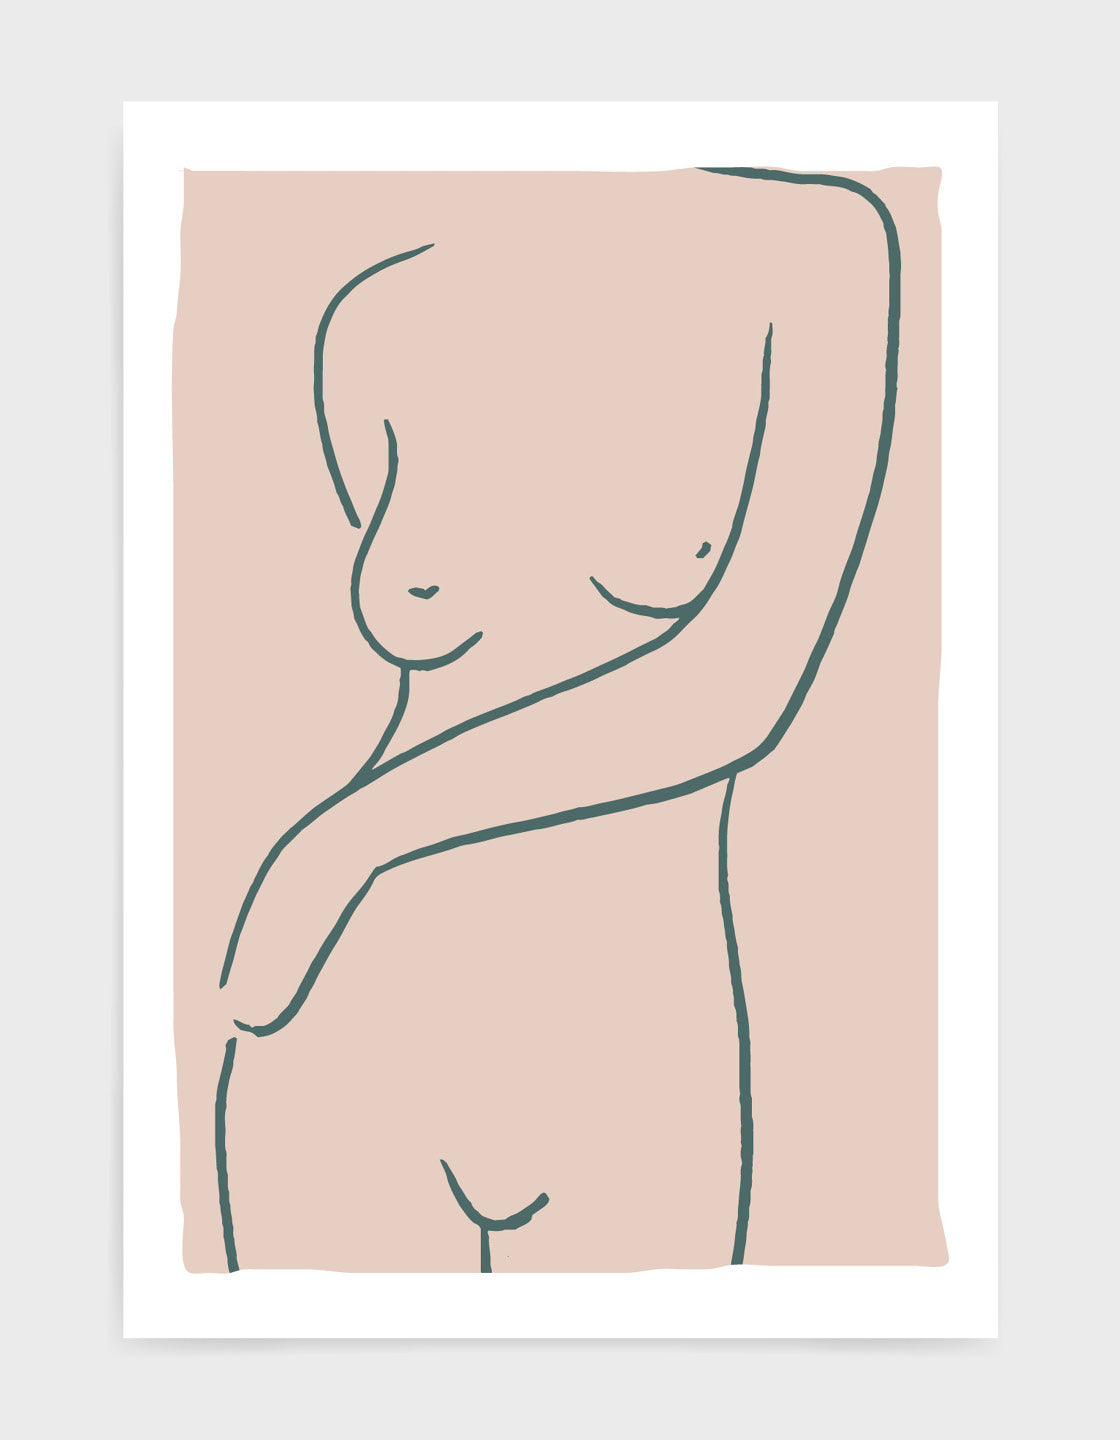 Sensual line drawing of a woman's naked torso with one arm crossed over her body on a pink background